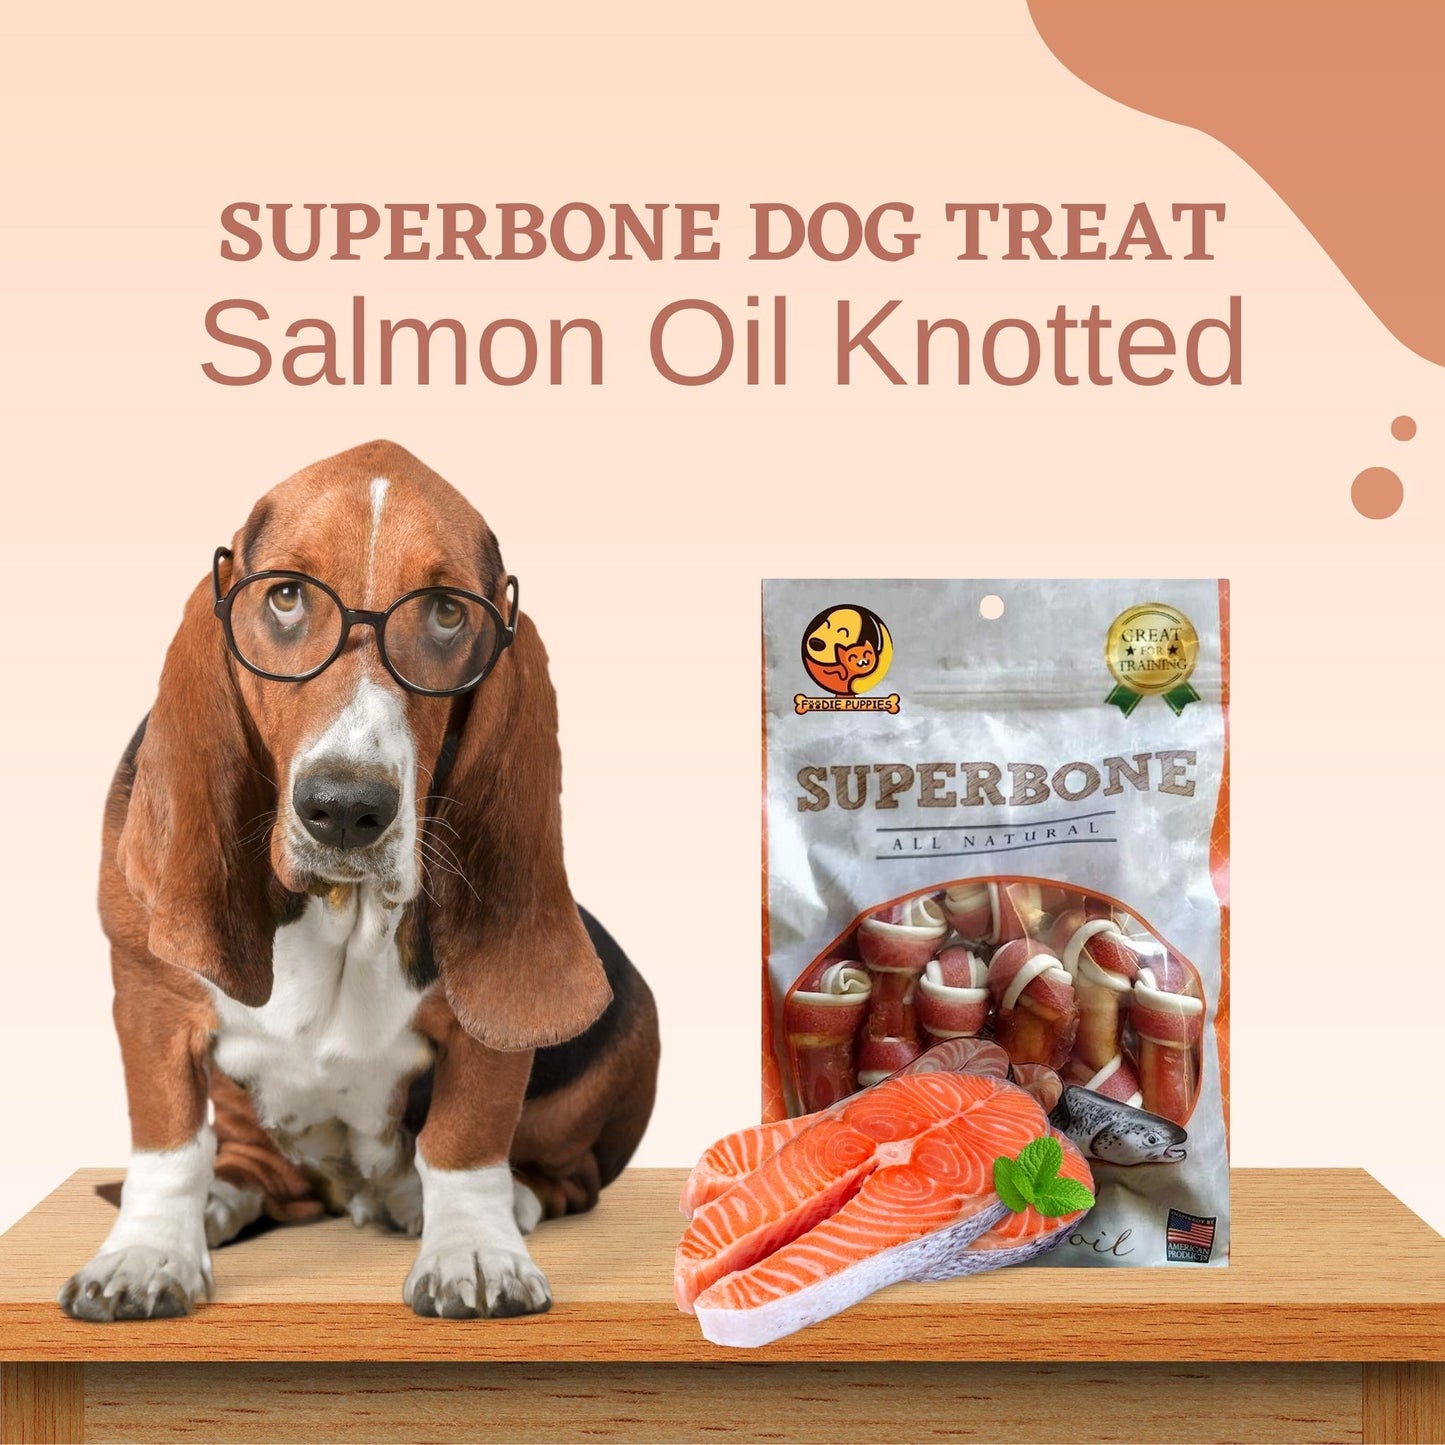 SuperBone All Natural Salmon Oil Knotted Dog Treat - Pack of 1